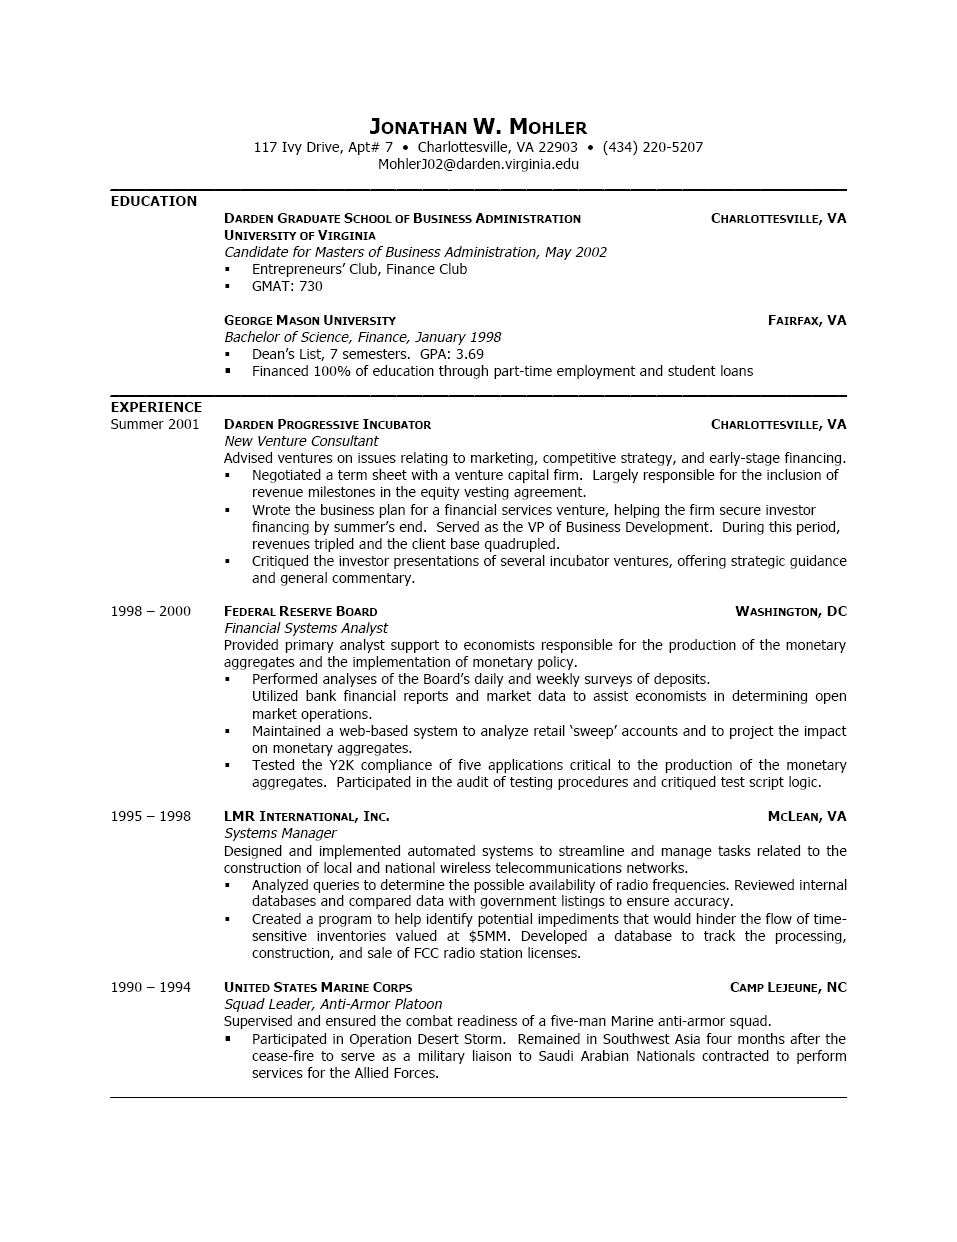 Roustabout resume objective